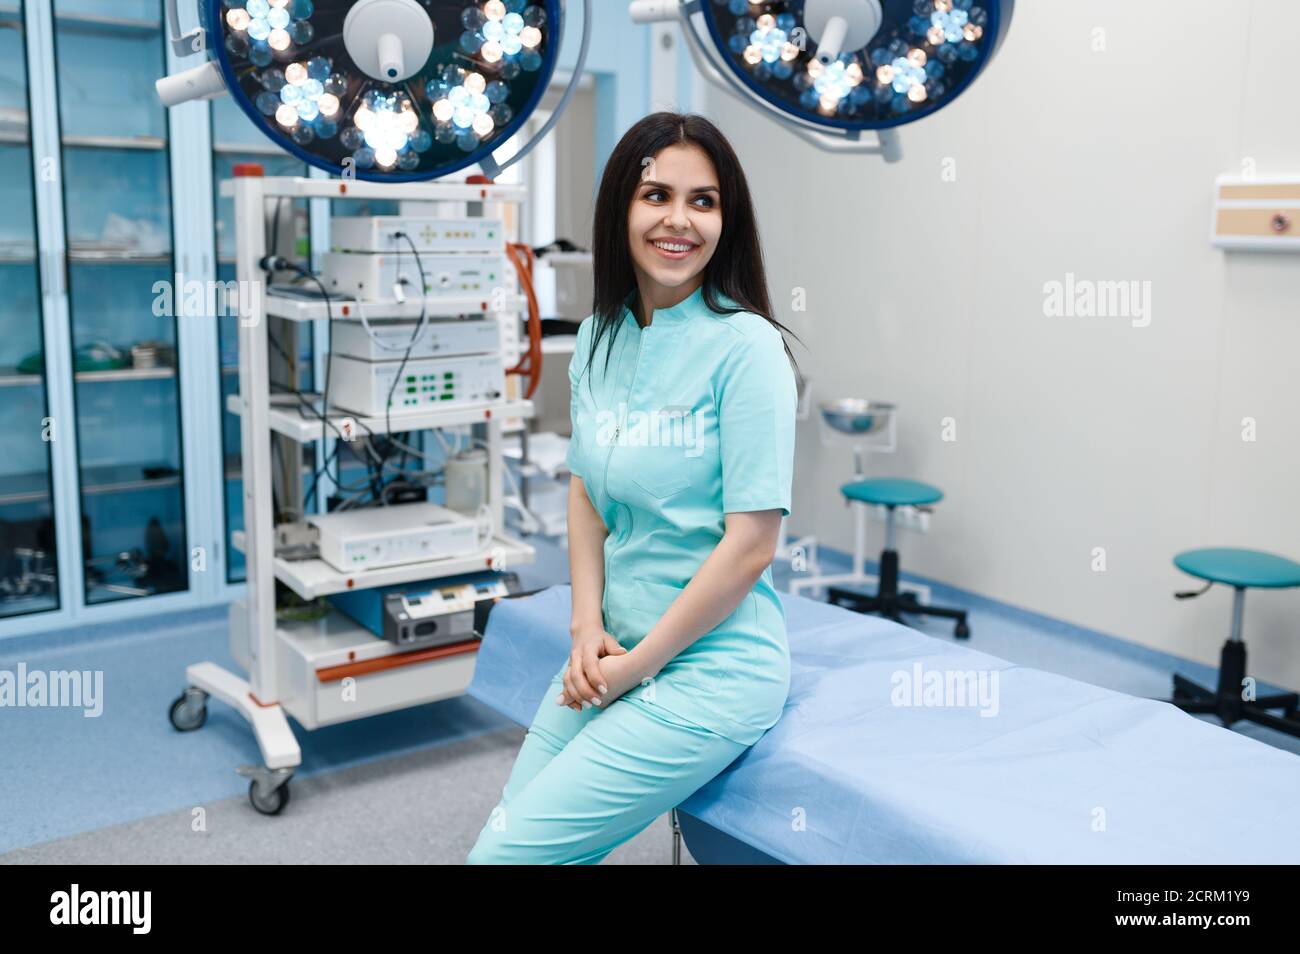 Smiling female surgeon poses at operating table Stock Photo